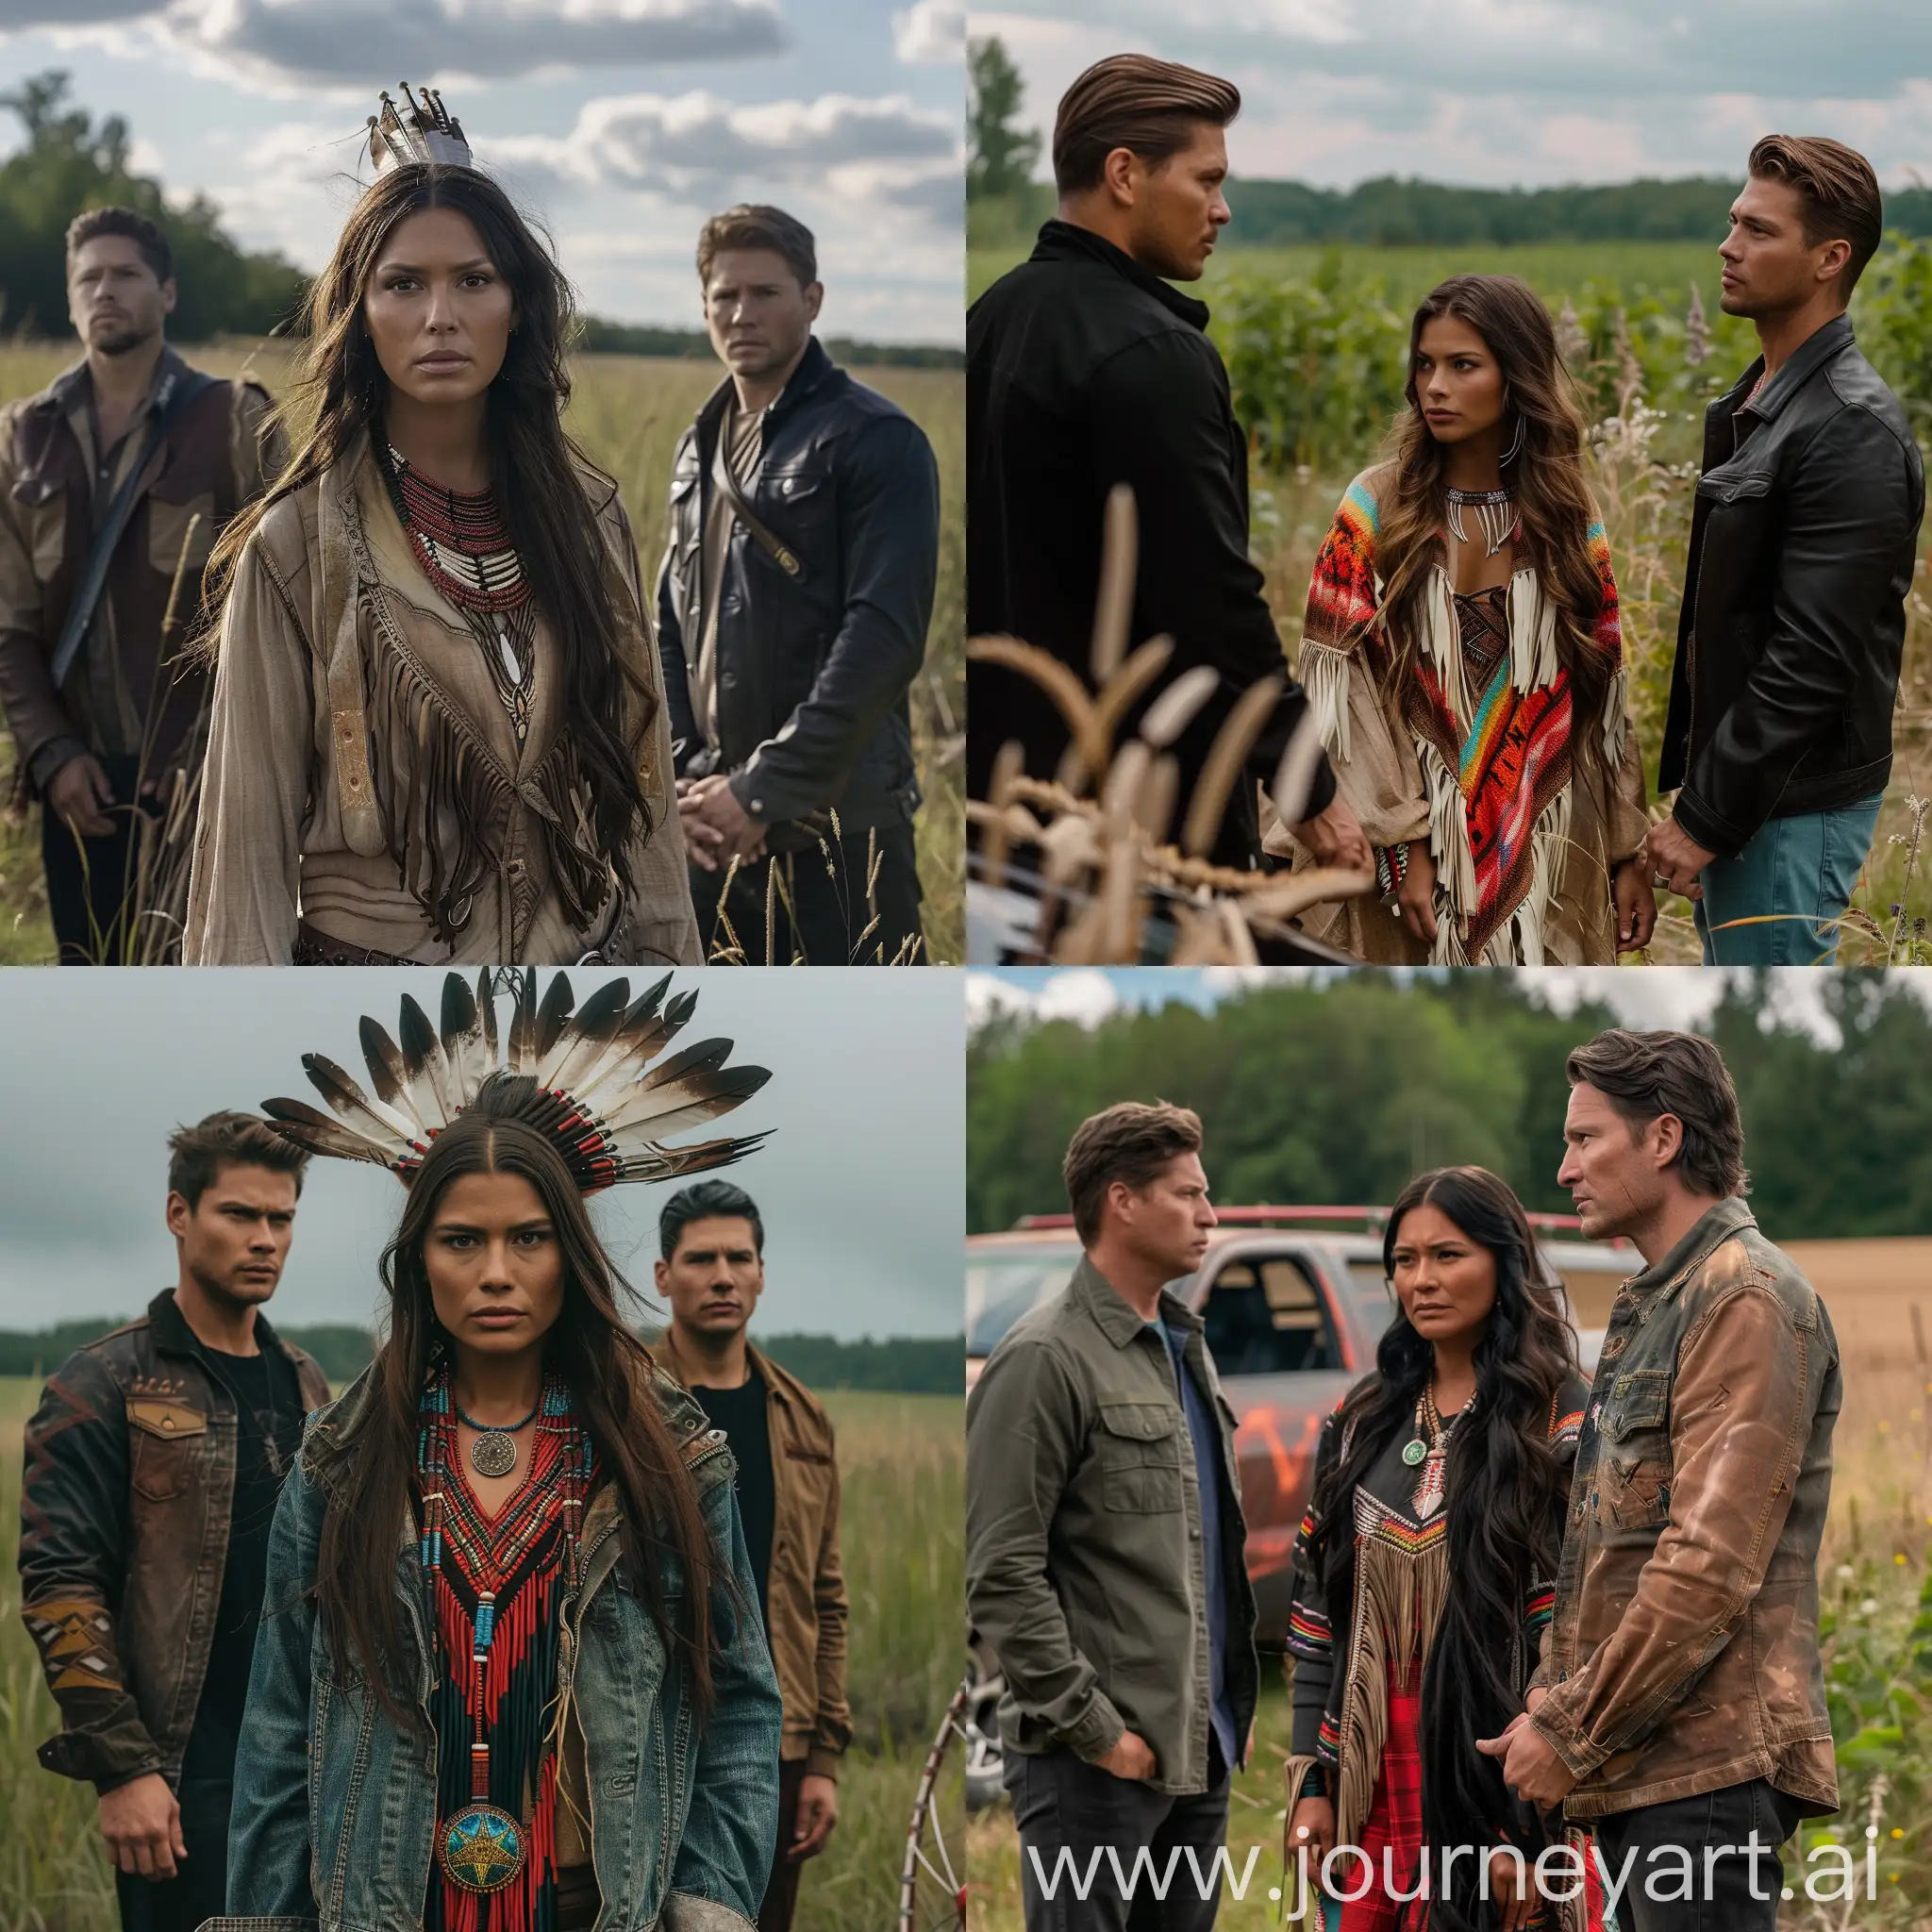 native american woman, supernatural tv show, in a field, two attractive men standing by her, auto shop